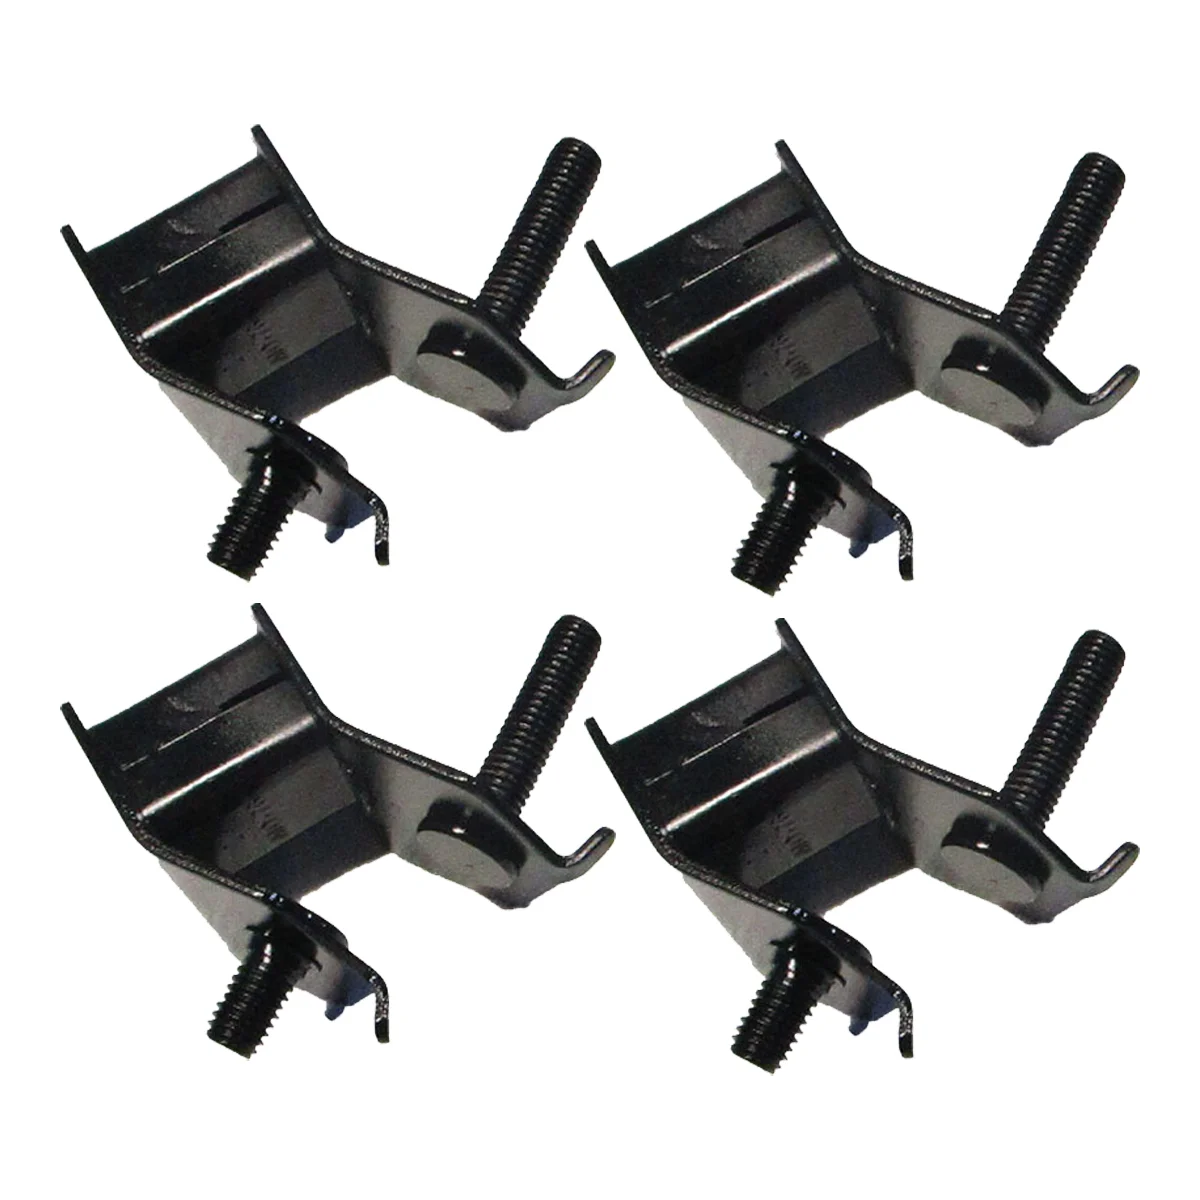 

4 Pcs Shock-absorbing Feet Generator Support Motor Rubber Mounts Electic Lawn Mowers Replacement Accessories Electric Bracket